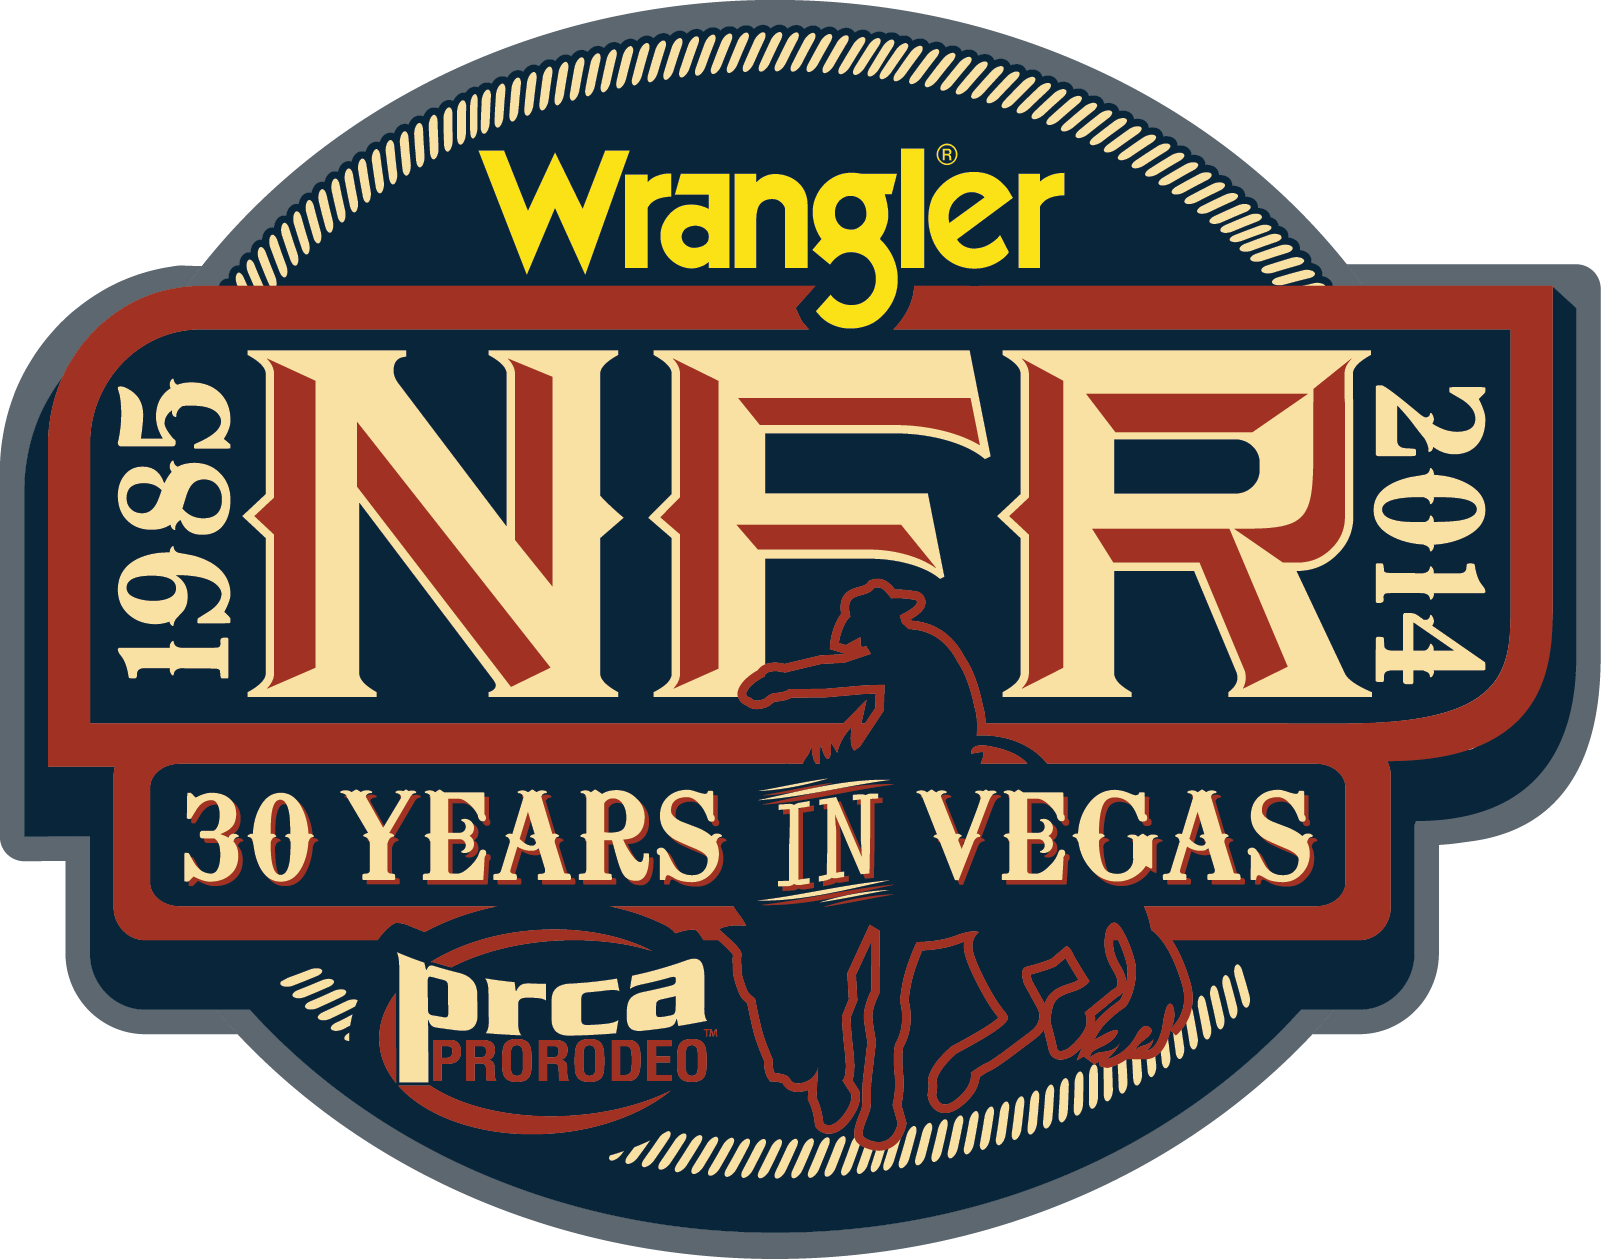 NFR Logo - Wrangler NFR 30th book becoming a reality | NFR Insider